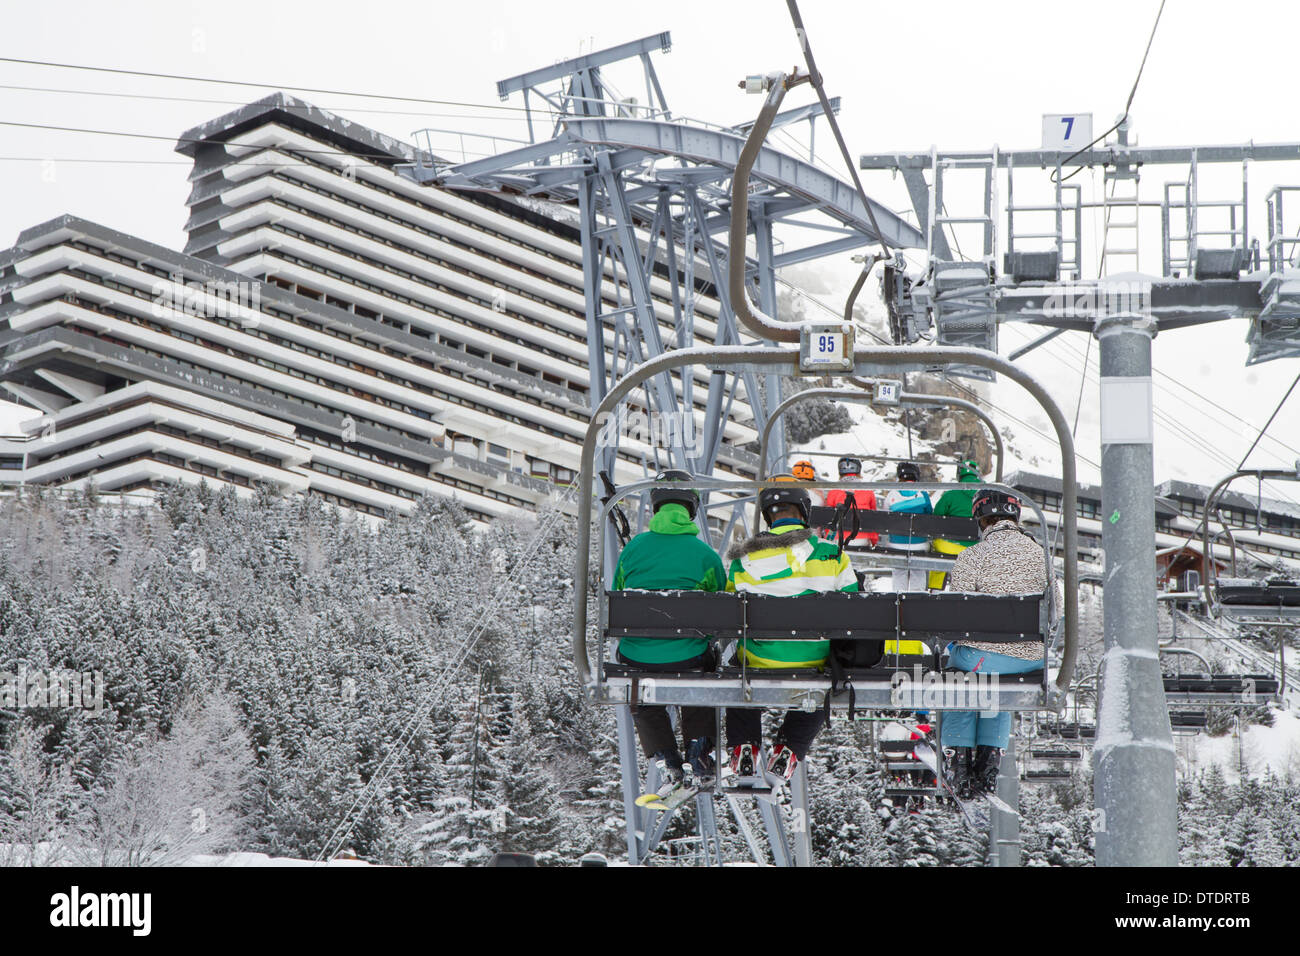 Skiers in a chairlift in Les Menuires, Trois Vallees, France Stock Photo